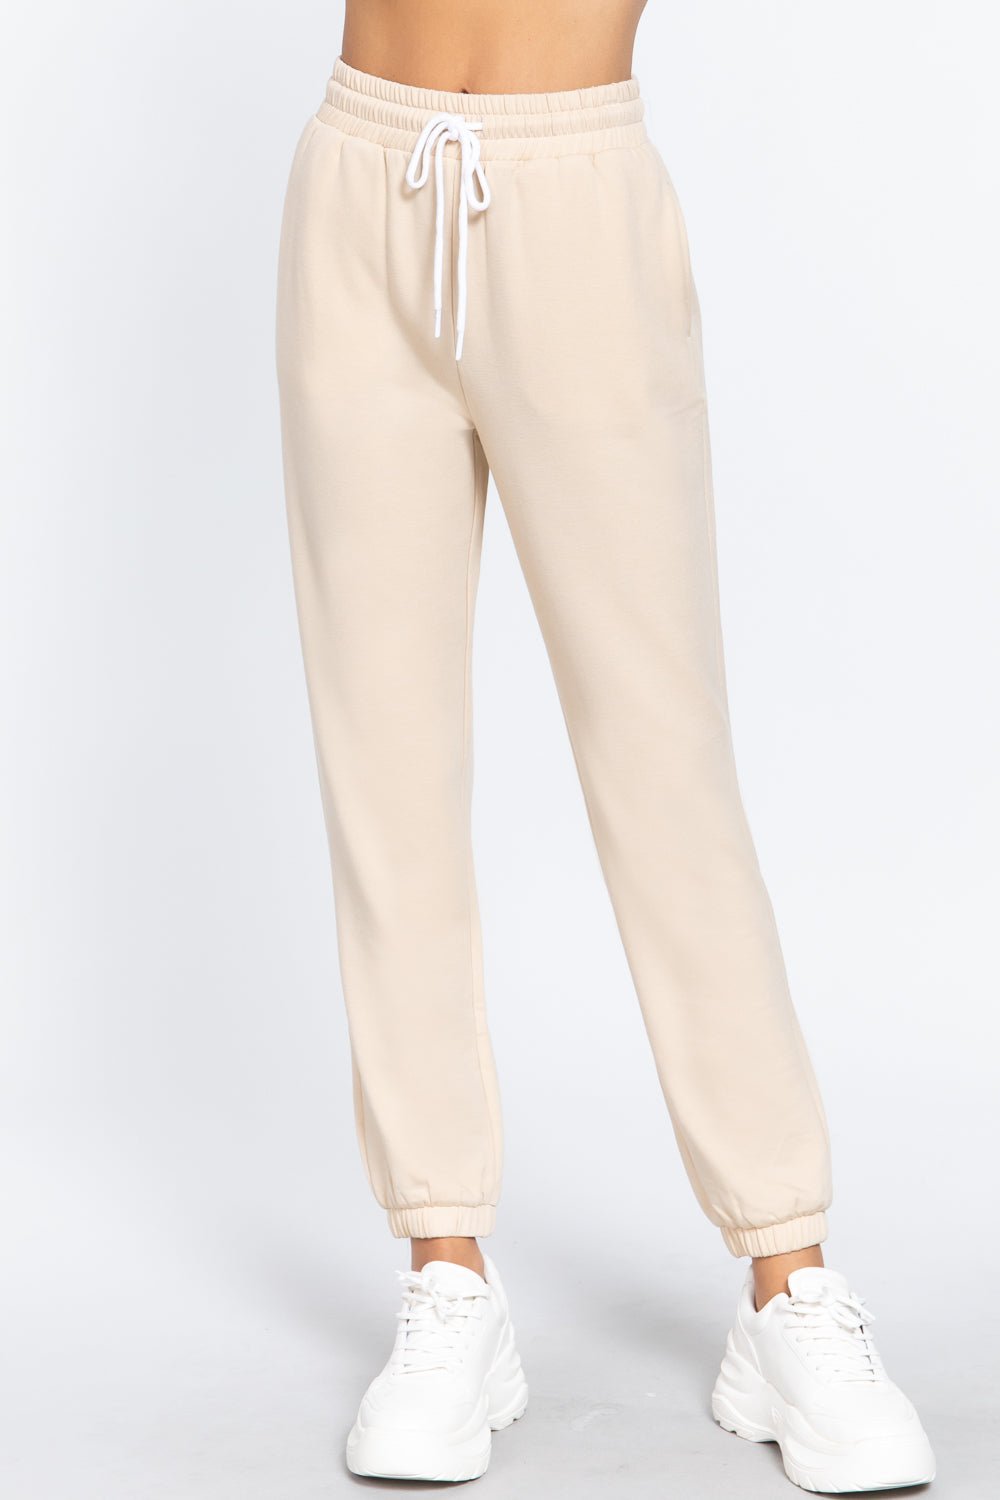 Our Best Polyester/Rayon Blend Fleece French Terry Drawstring Waistband Jogger Pants (Taupe)